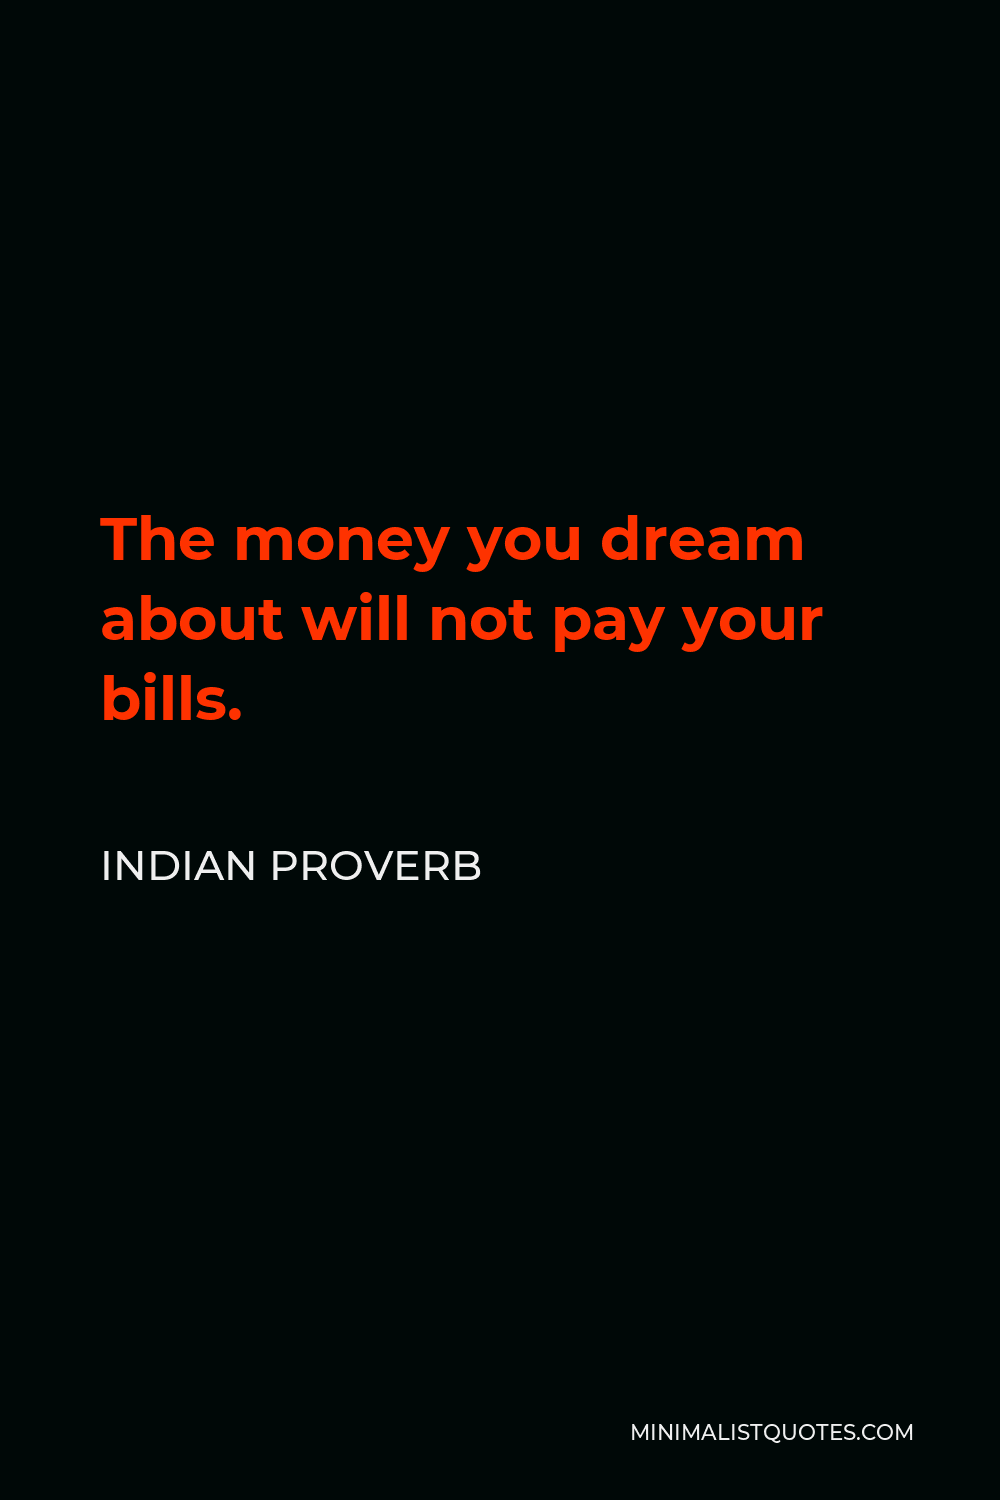 Indian Proverb Quote - The money you dream about will not pay your bills.